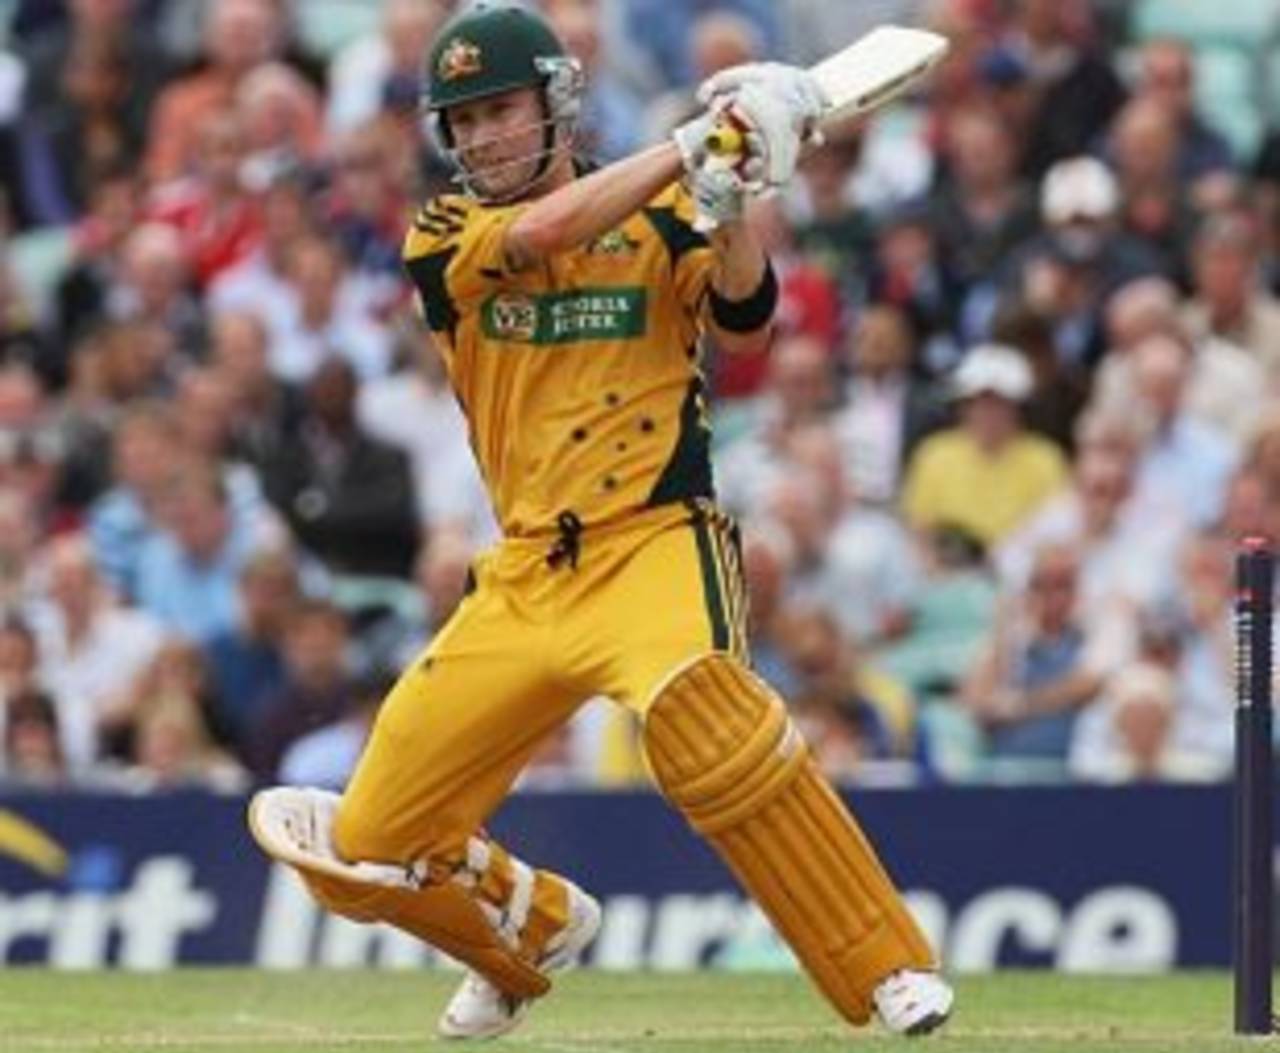 Michael Clarke pulls from deep in his crease, England v Australia, 1st ODI, The Oval, September 4, 2009